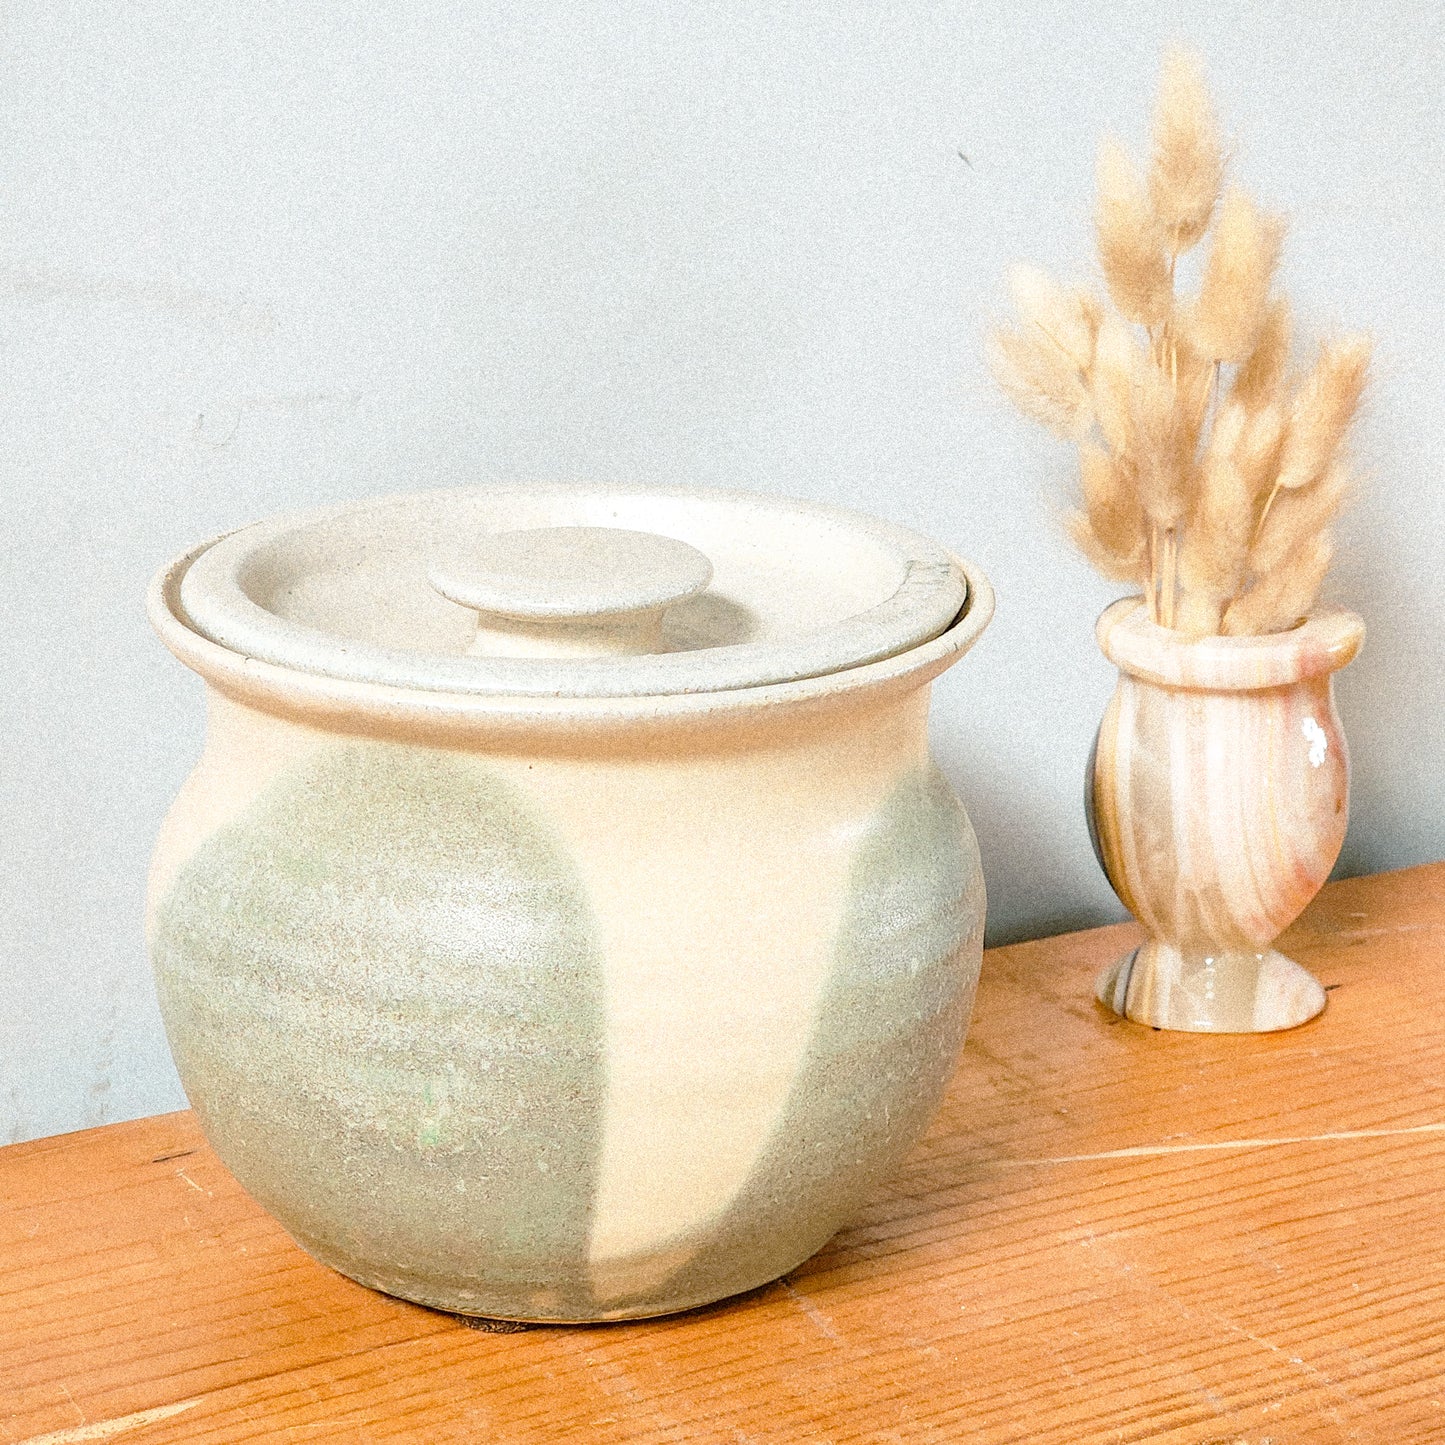 Medium Sized Hand-Crafted Ceramic Canister - Reclaimed Mt. Goods